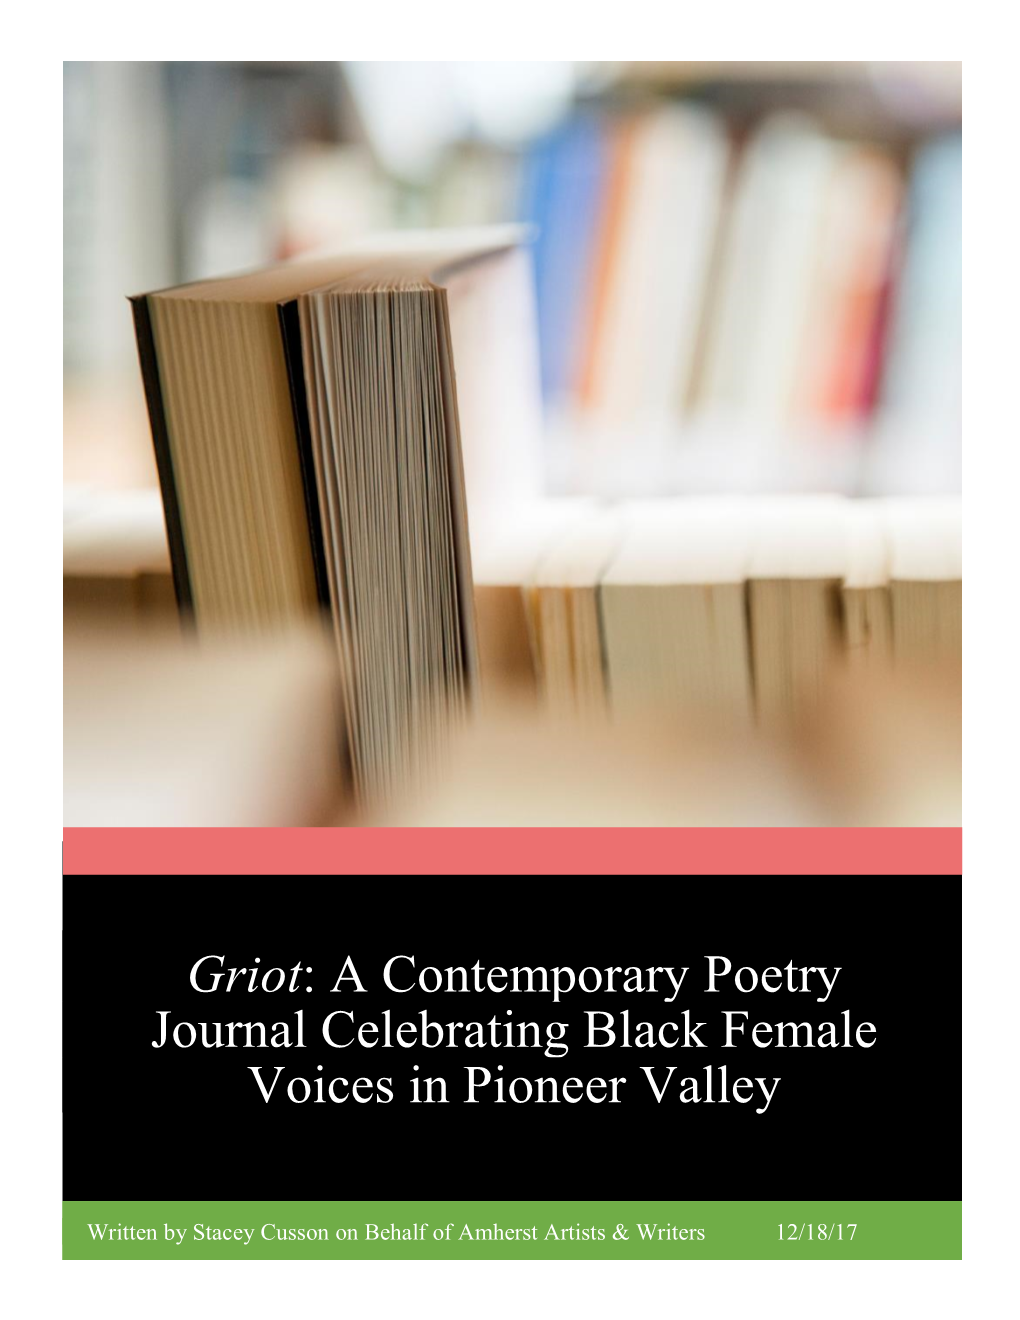 Griot: a Contemporary Poetry Journal Celebrating Black Female Voices in Pioneer Valley